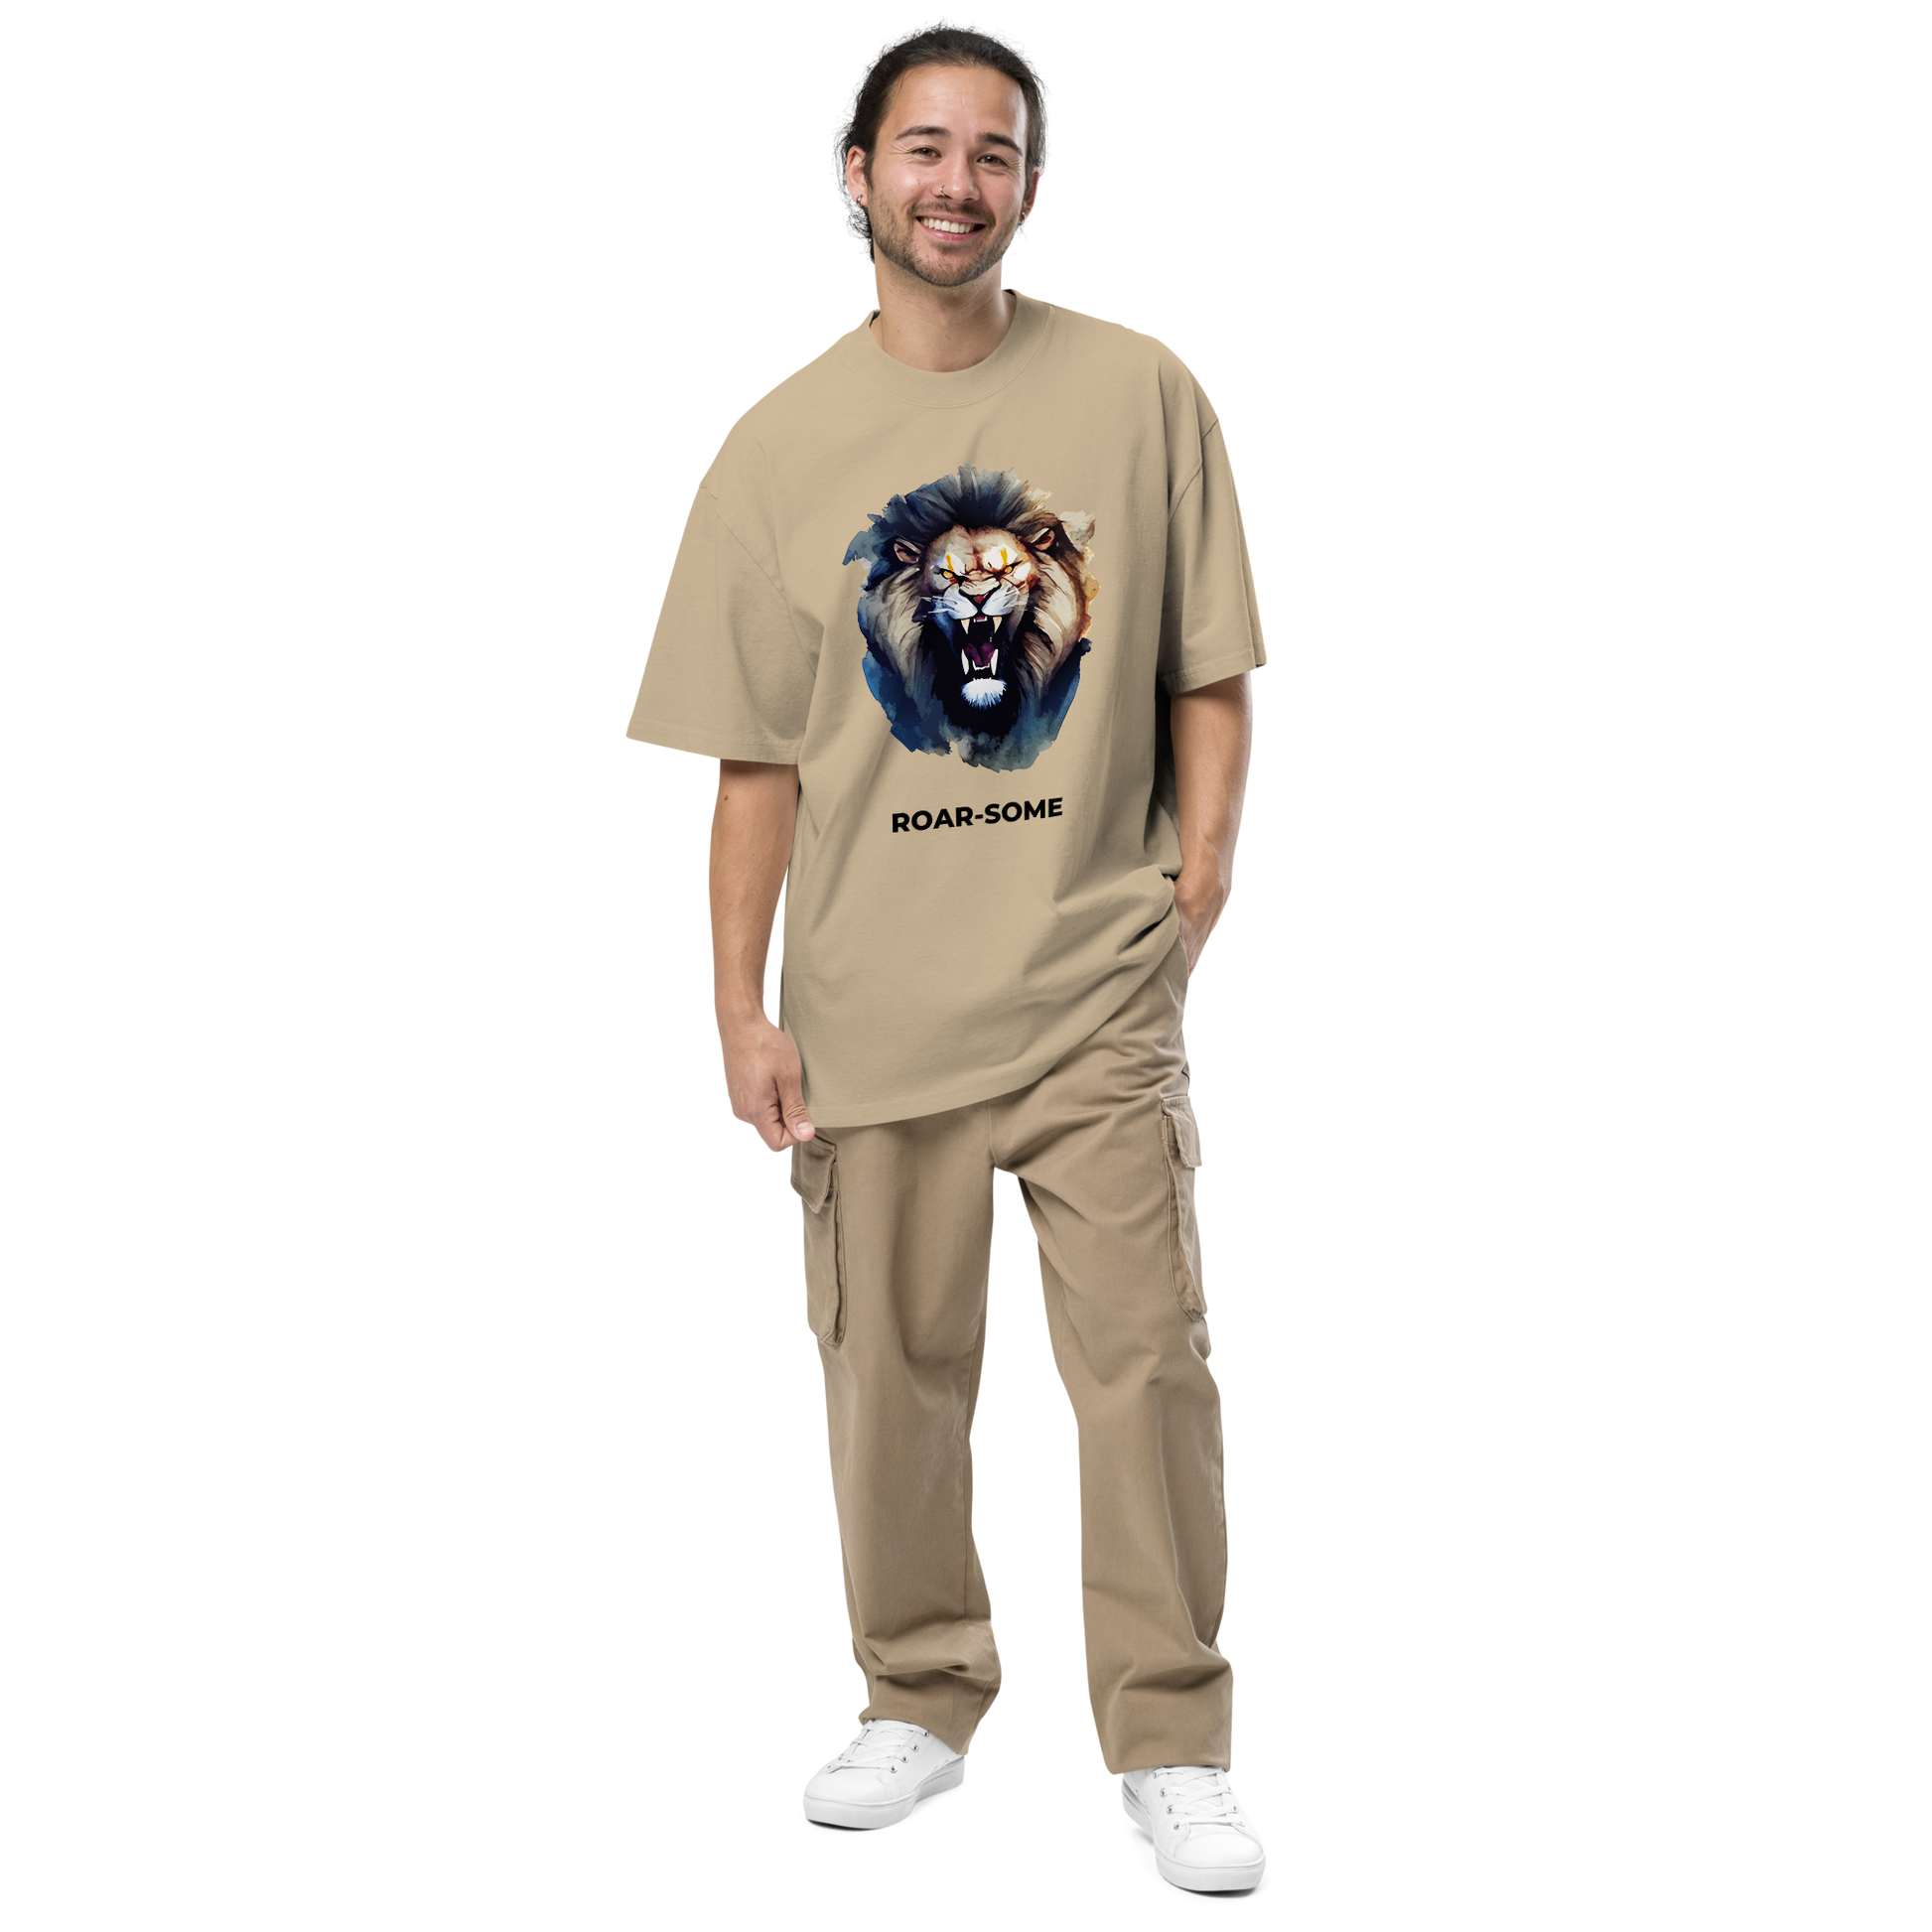 Smiling man wearing a Faded Khaki Lion Oversized T-Shirt featuring a Roar-Some graphic on the chest - Cool Graphic Lion Oversized Tees - Boozy Fox